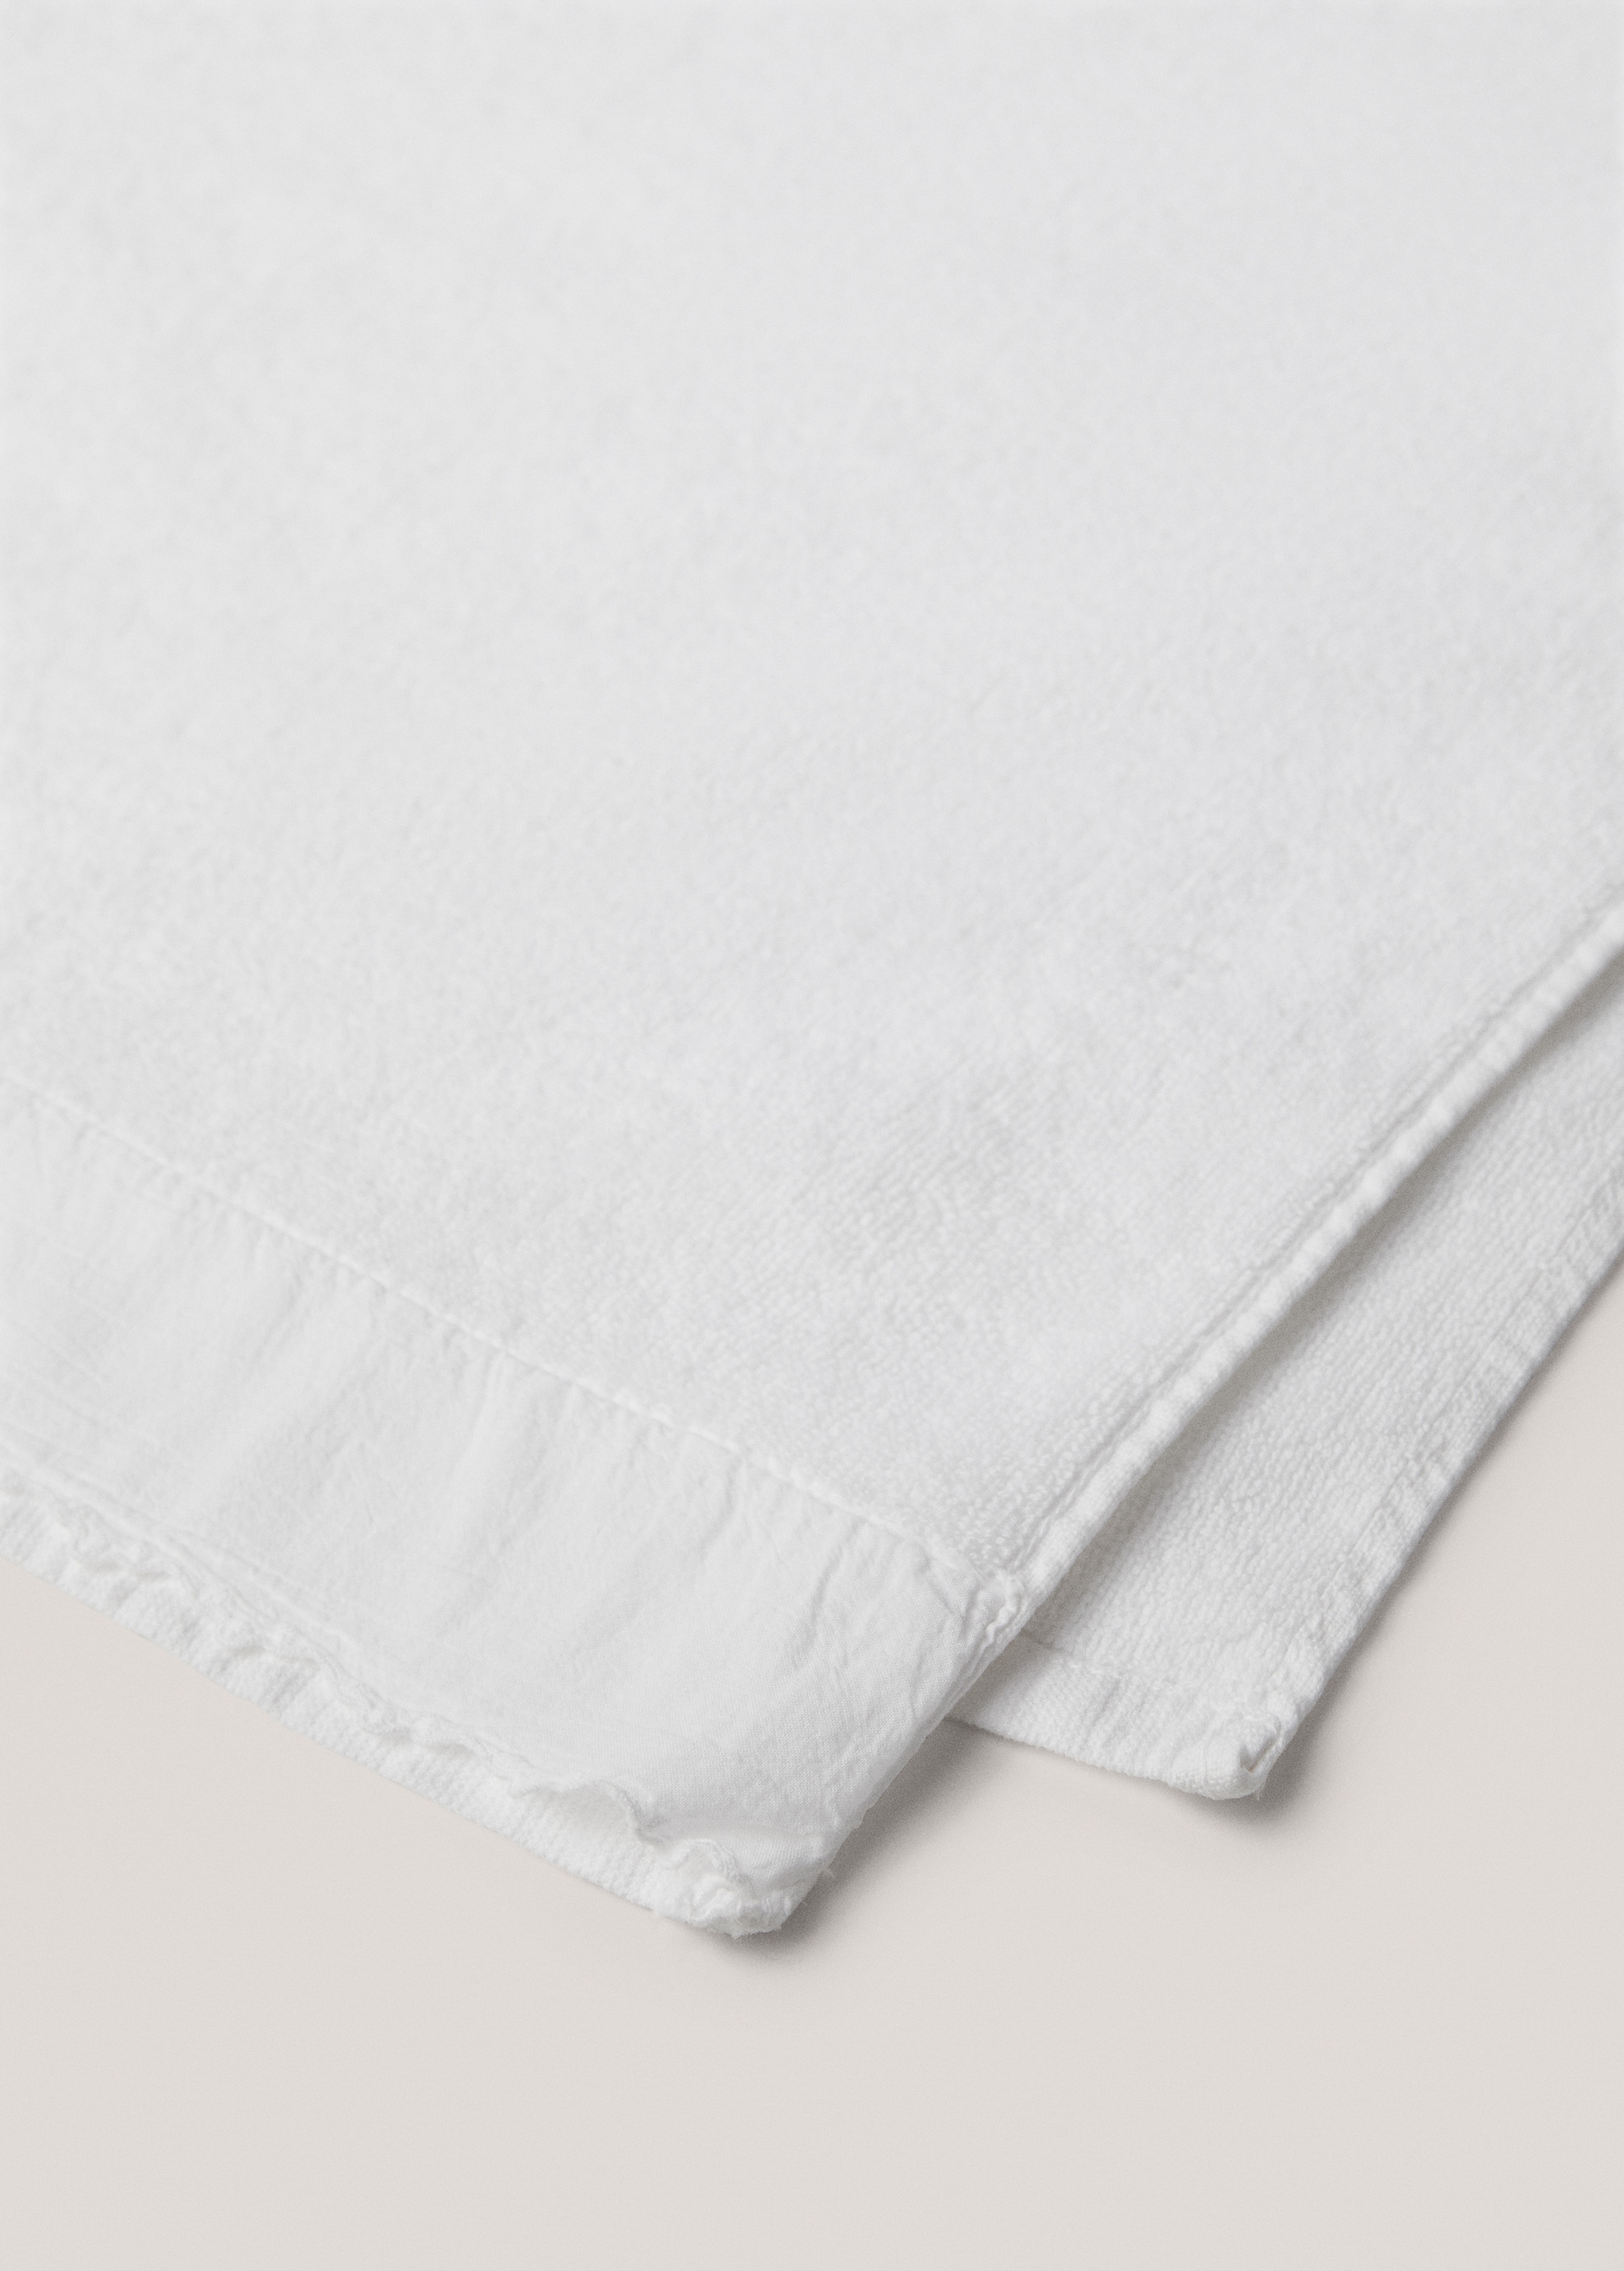 Cotton bath towel 20x35 in - Details of the article 2